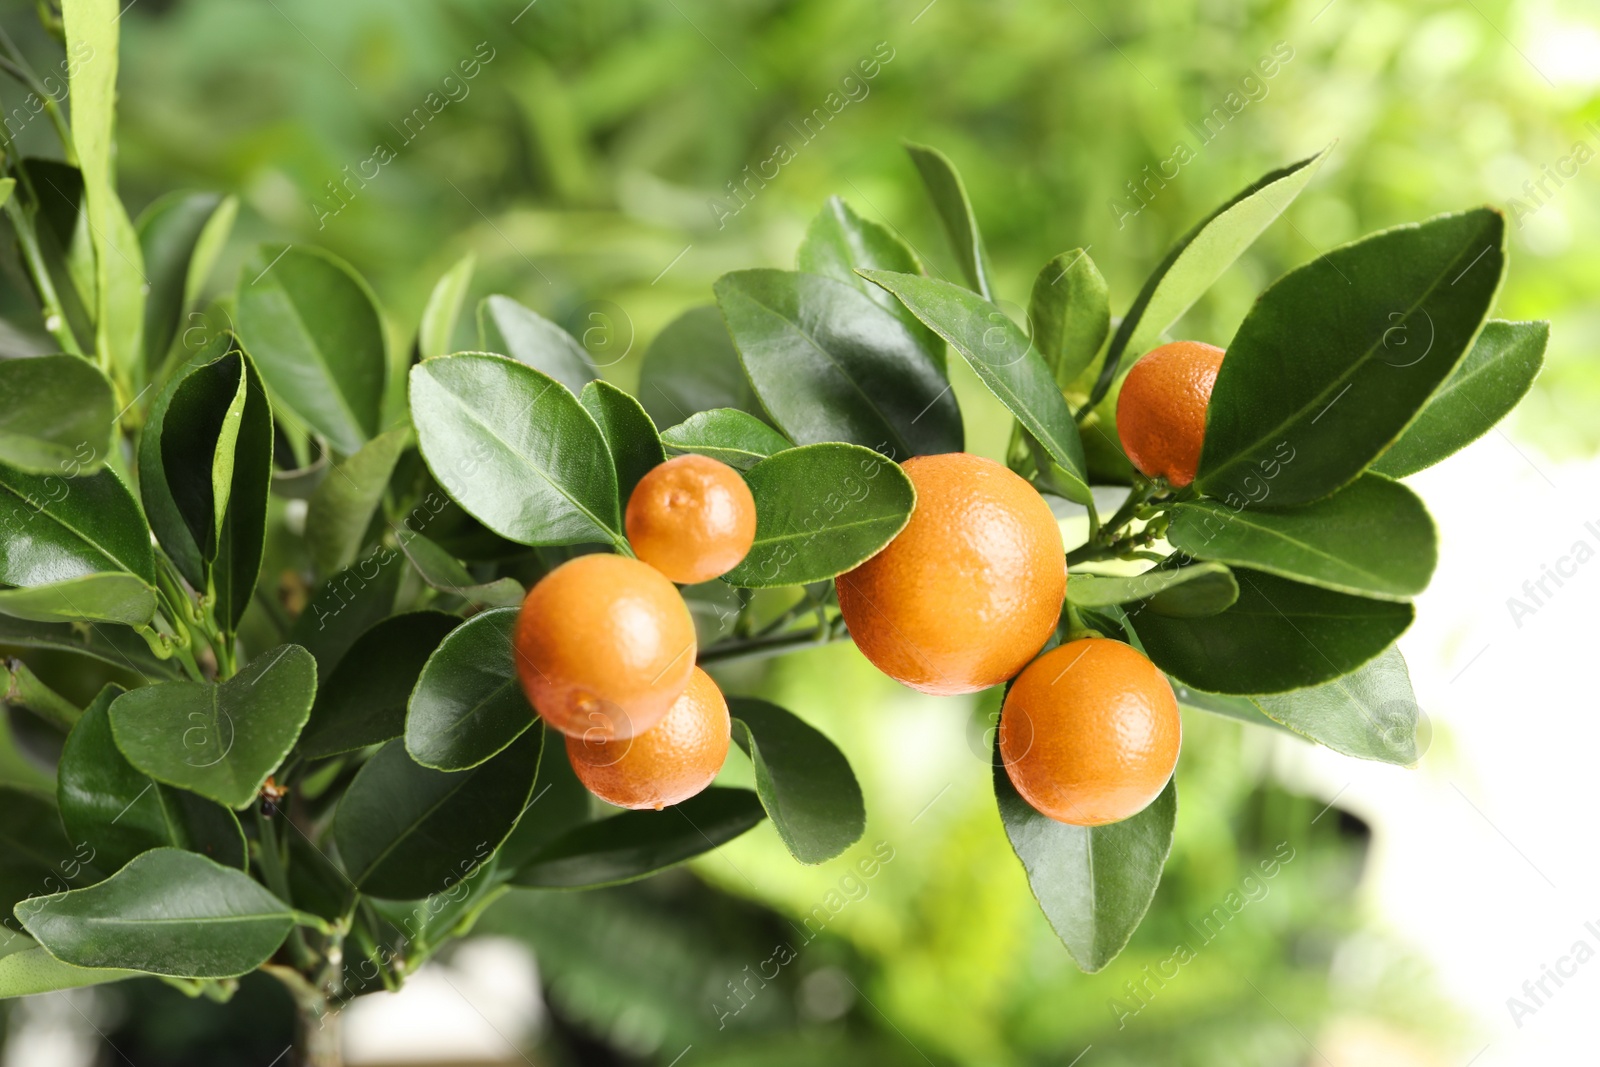 Photo of Citrus fruits on branch against blurred background